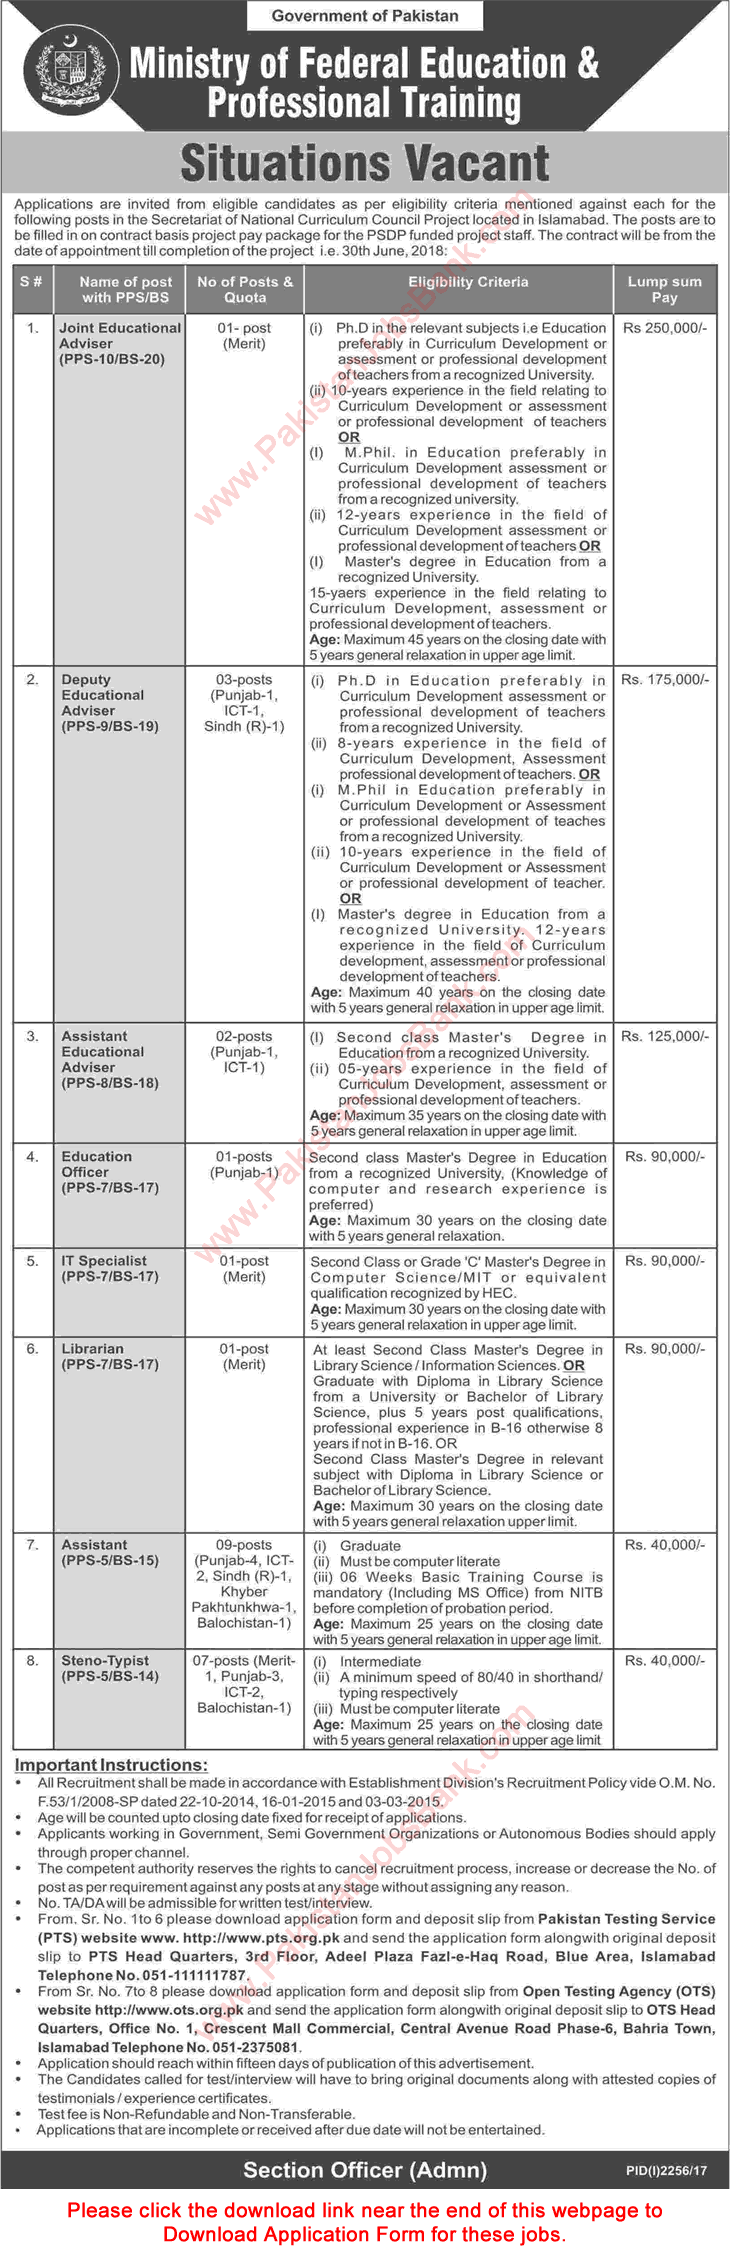 Ministry of Federal Education and Professional Training Jobs 2017 October Application Form Assistants & Others Latest